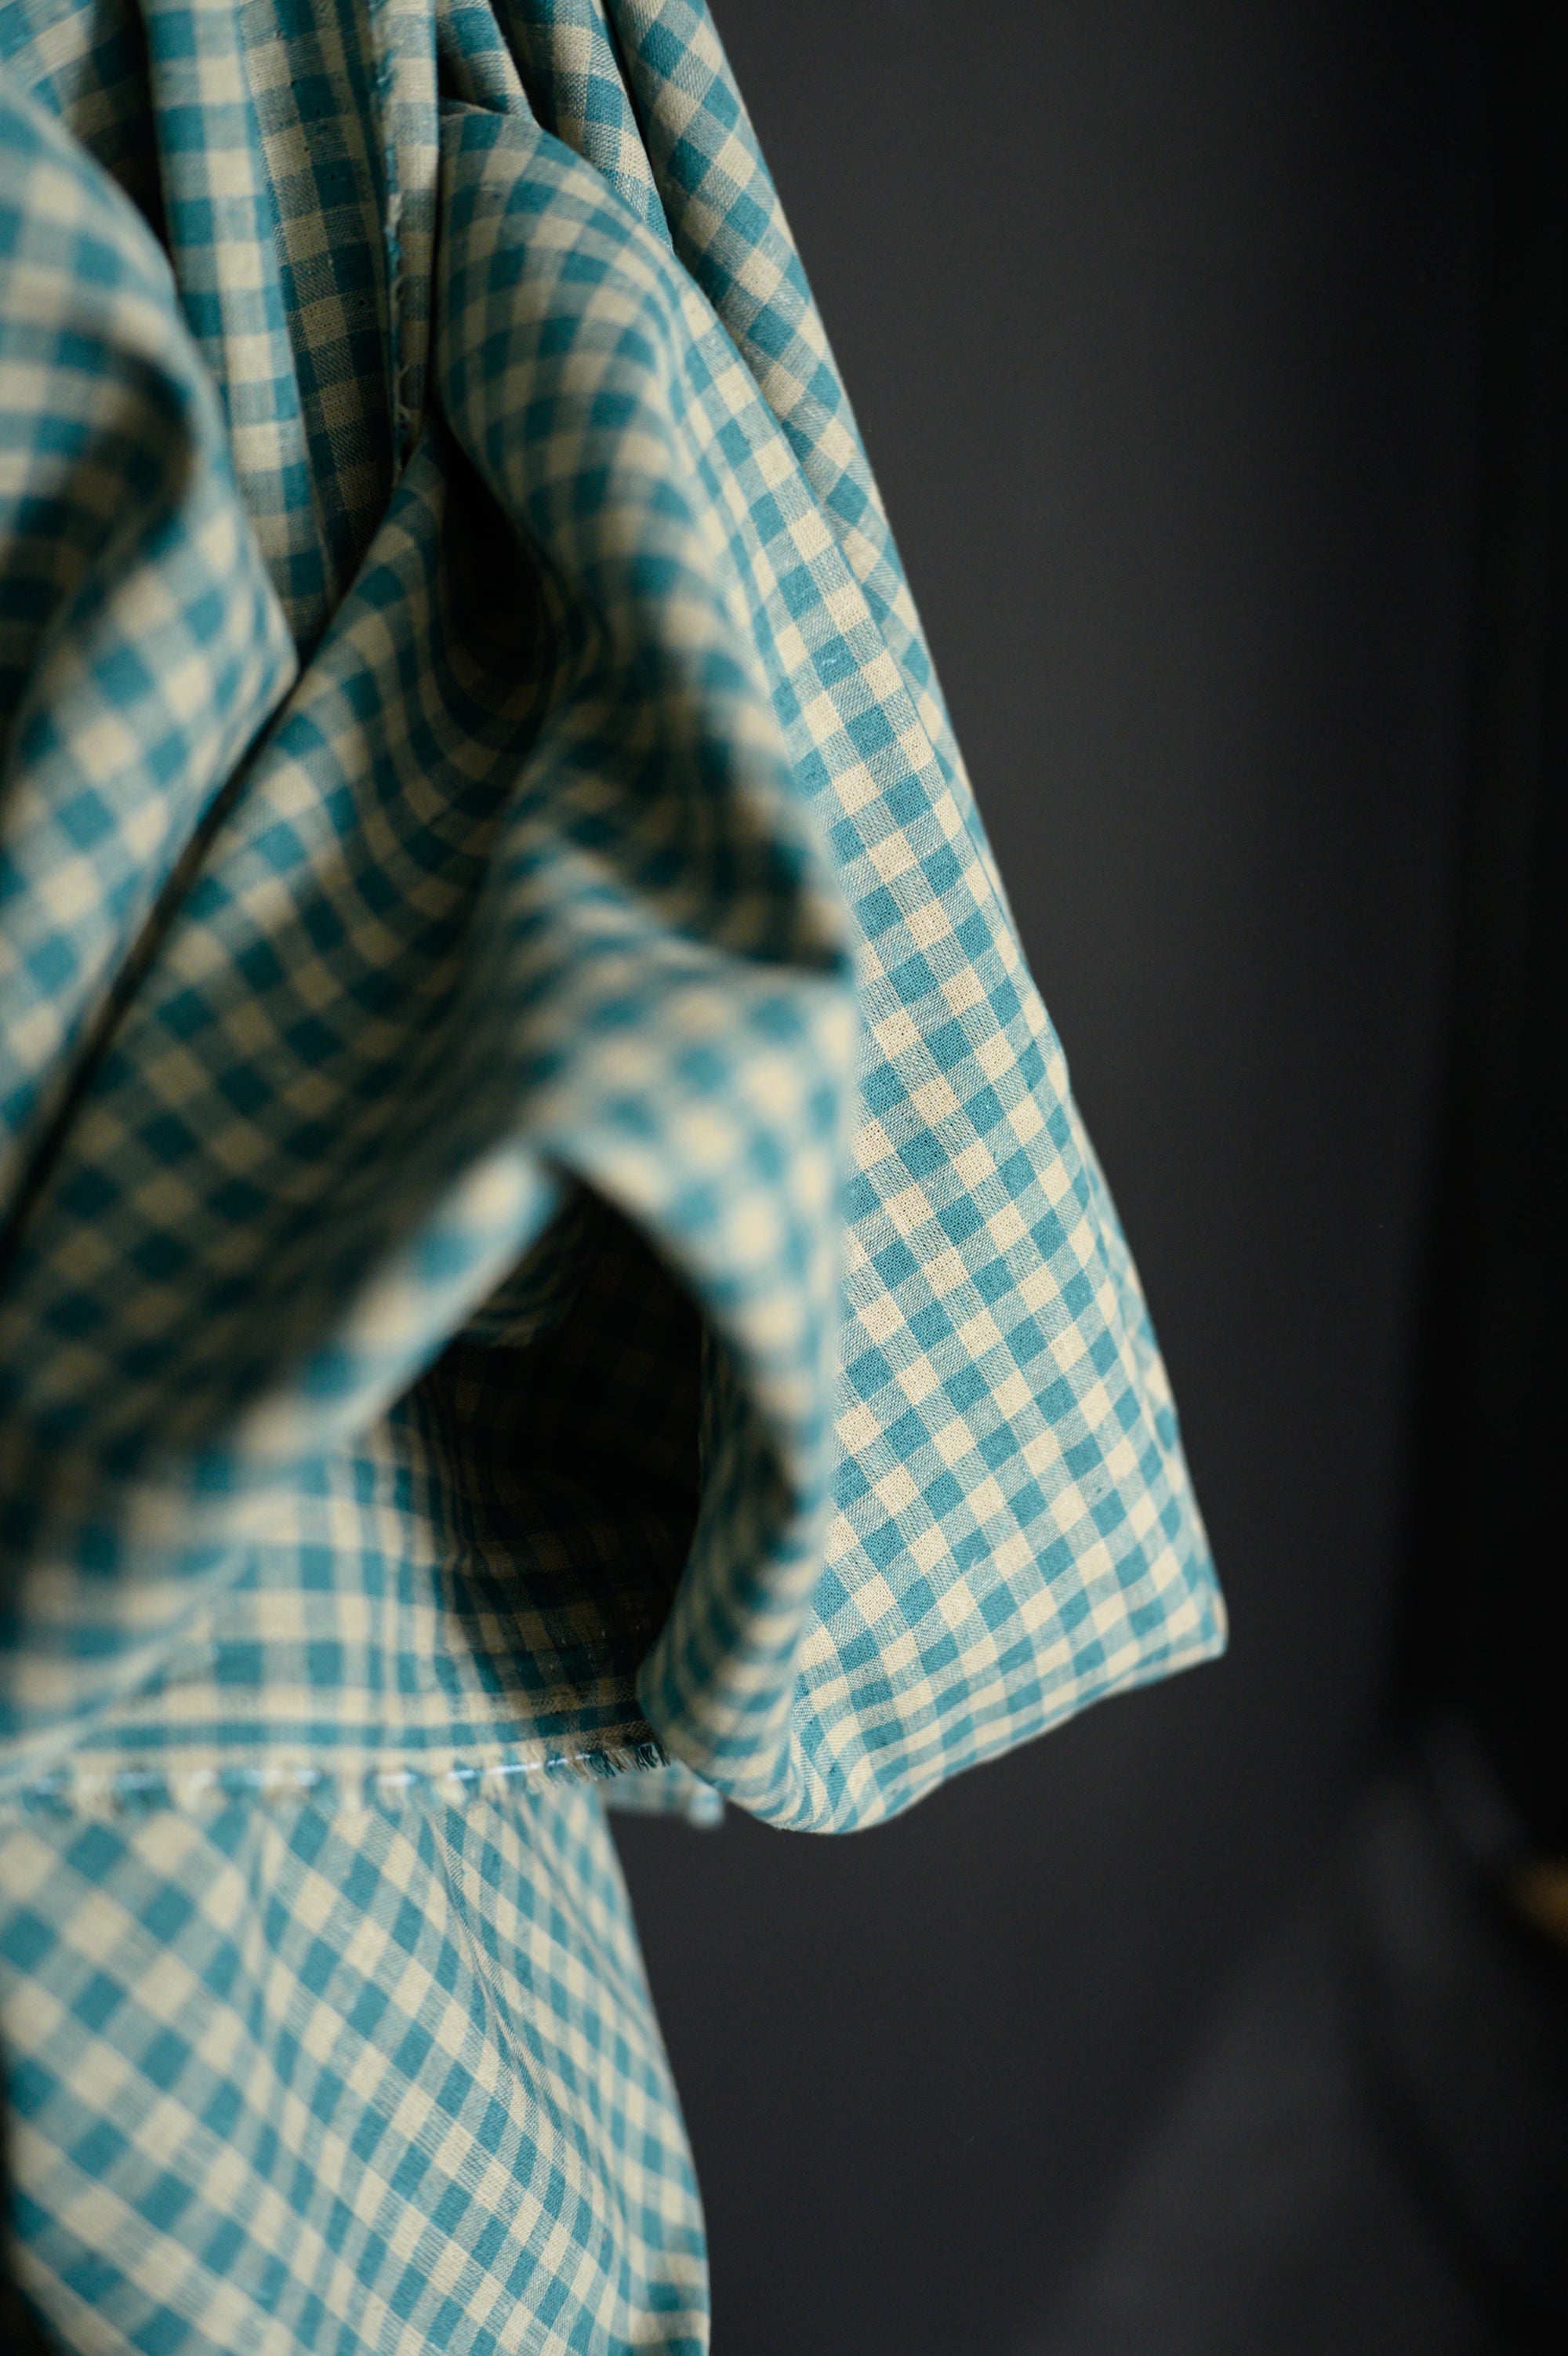 Close up of Teal and tan gingham, cotton/linen blend on a dark grey background.